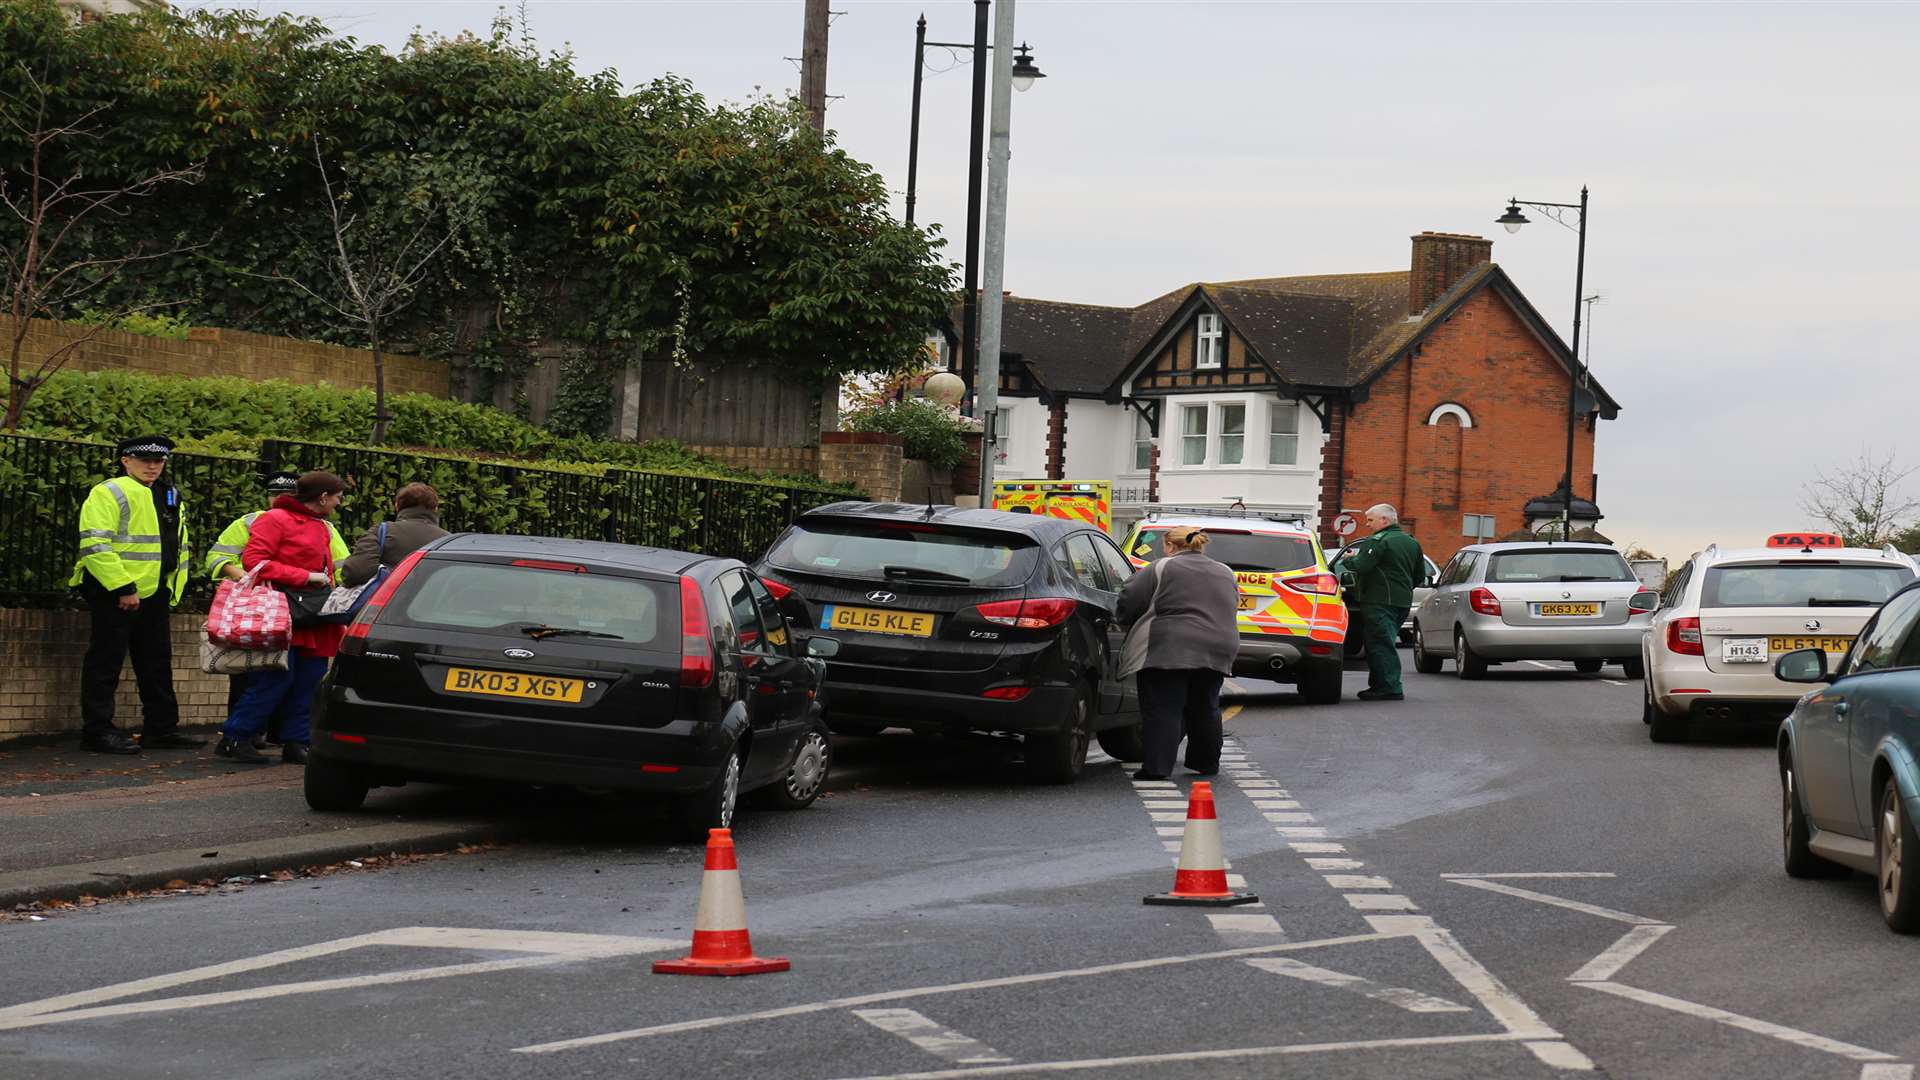 The scene of the crash at Chartwell Court, Chatham, at the junction with New Cut. Pic: Keith Thompson